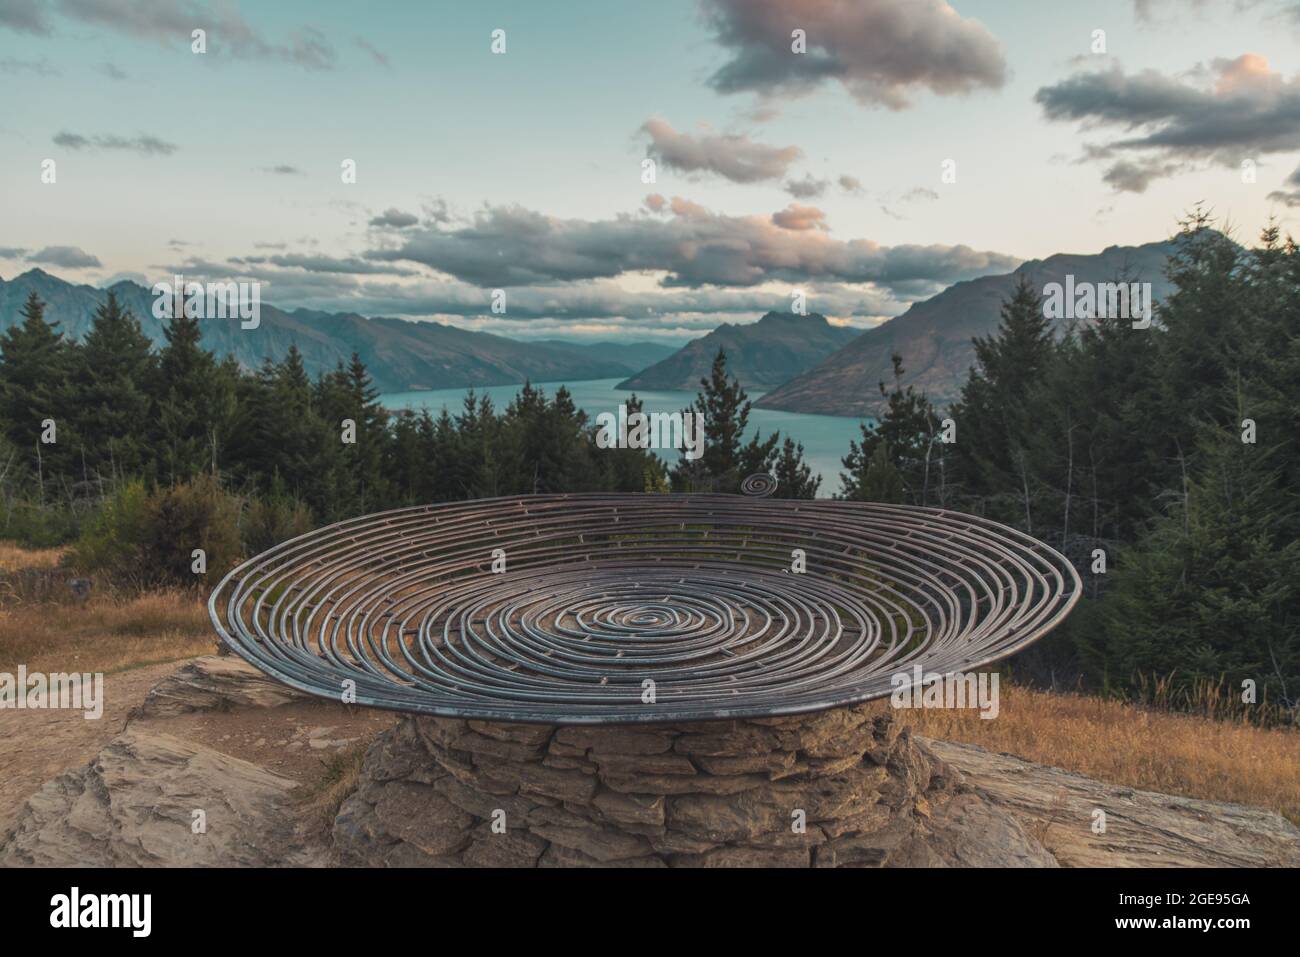 Basket of dreams on the top of Queenstown hill in New Zealand Stock Photo